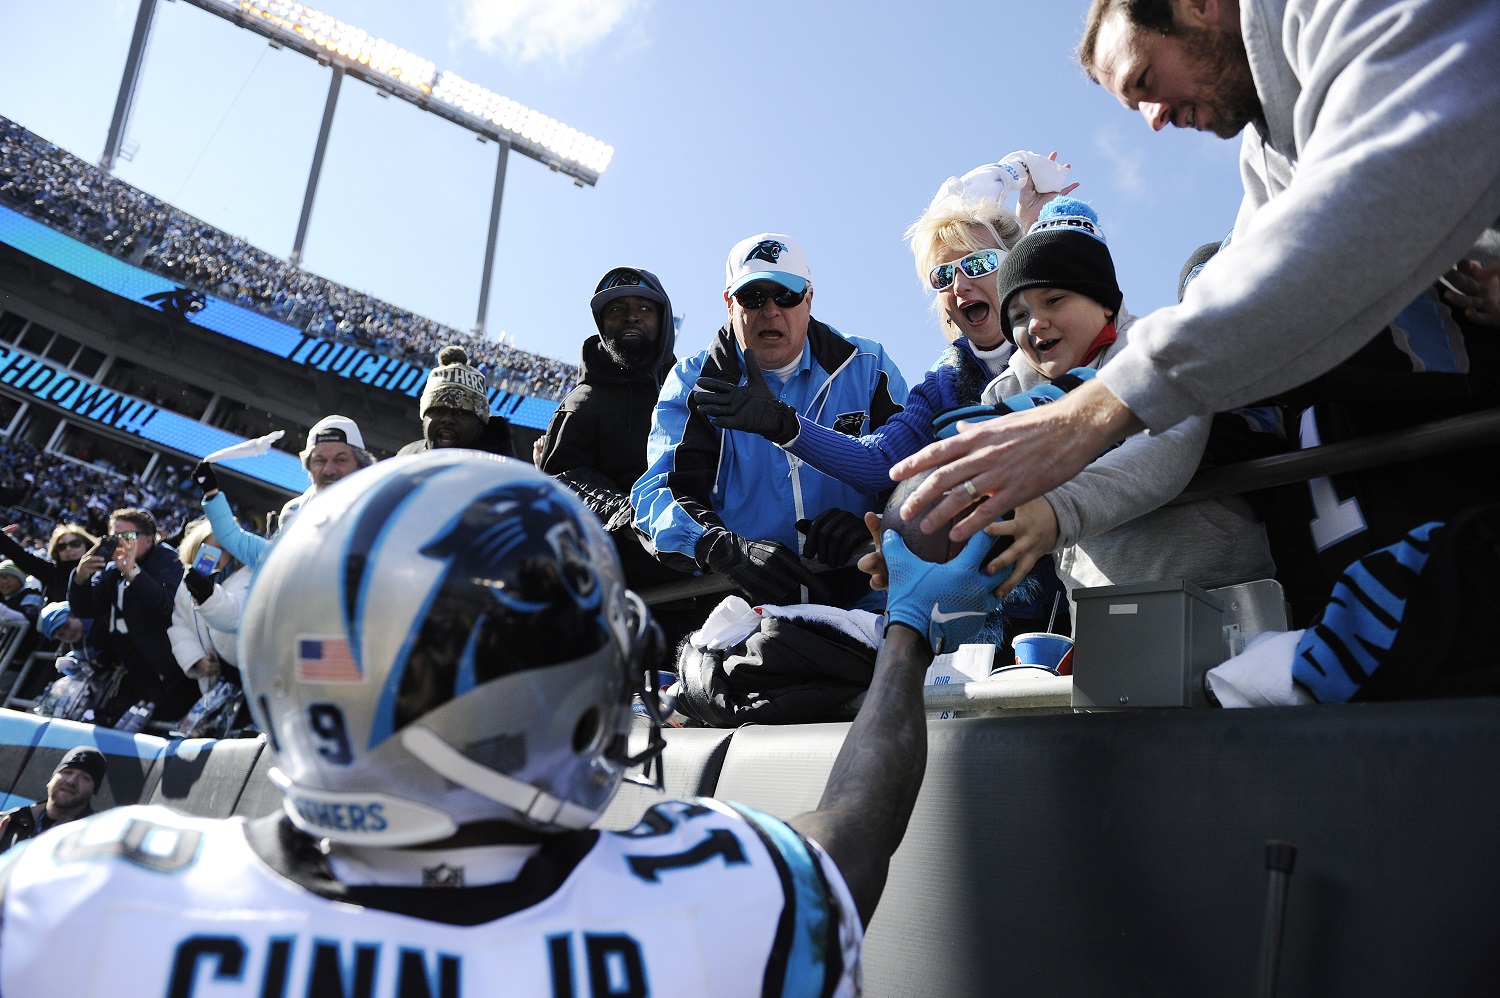 Carolina Panthers wide receiver Ted Ginn (19) hands the ball to a child int he stands after Carolina Panthers tight end Greg Olsen (88) scored a touchdown against the Seattle Seahawks during the first half of an NFL divisional playoff football game, Sunday, Jan. 17, 2016, in Charlotte, N.C. (AP Photo/Mike McCarn)